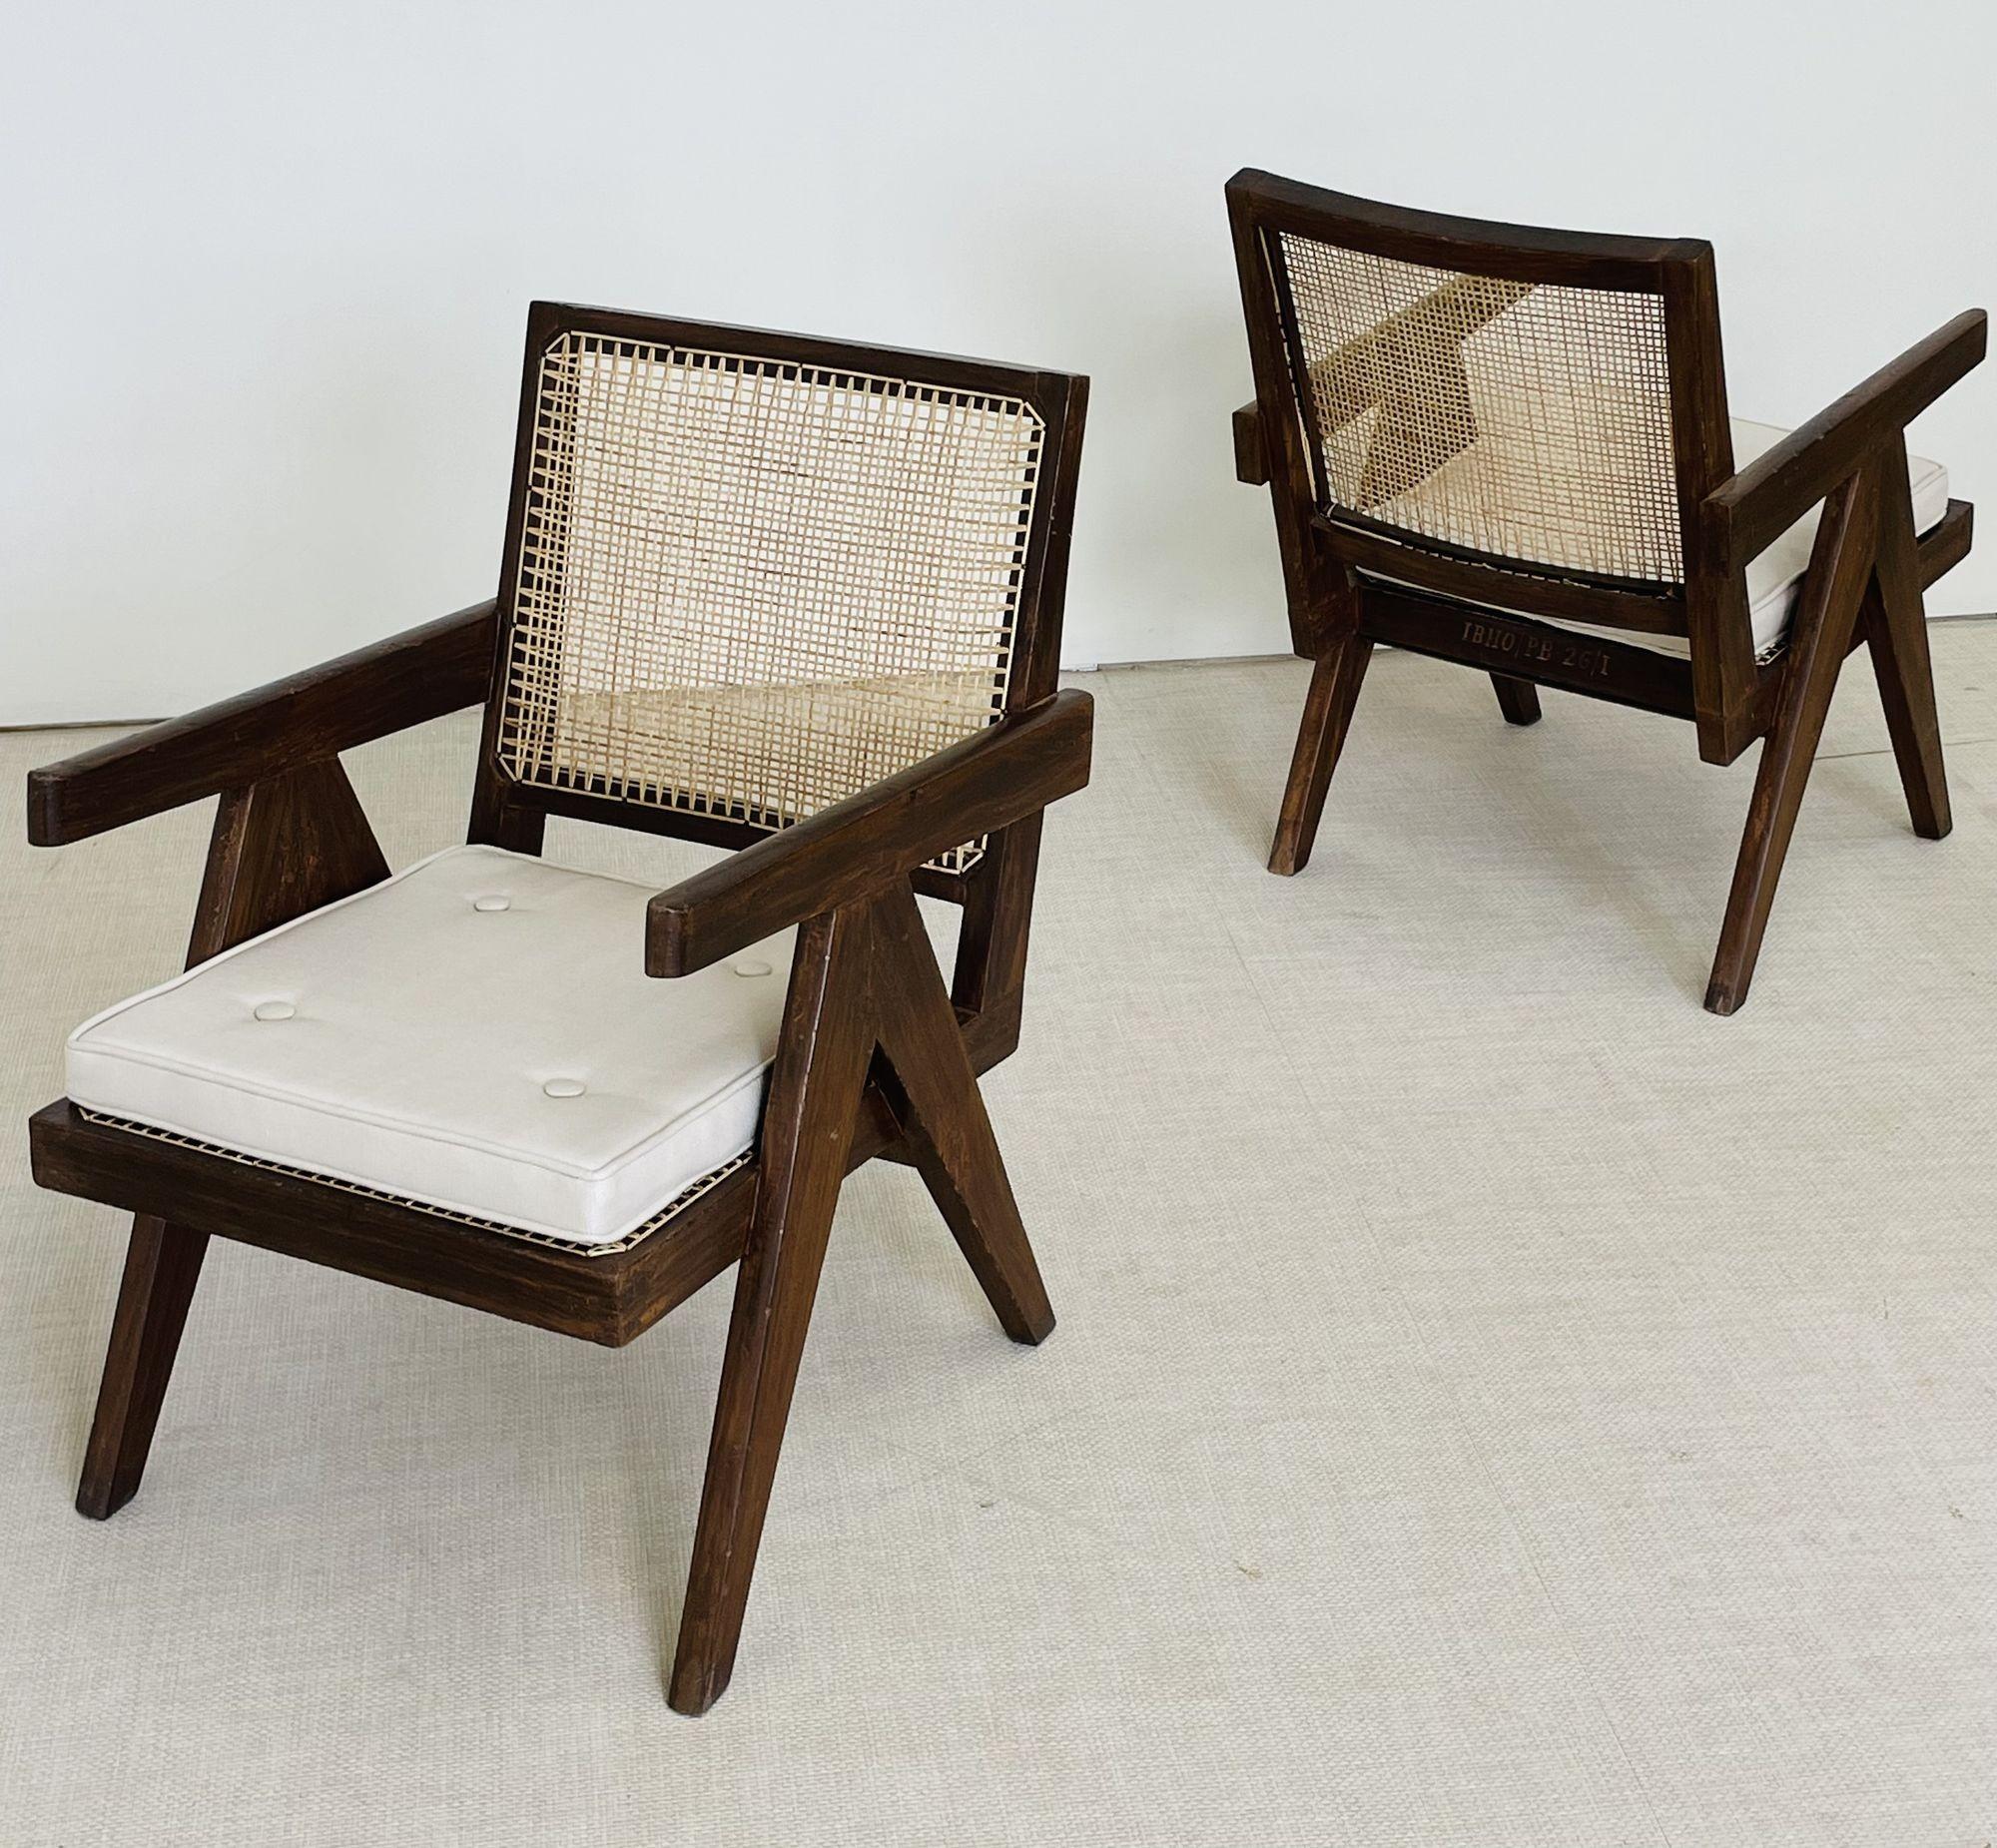 Pierre Jeanneret, French Mid-Century Modern, Lounge Chairs, Cane, Chandigarh In Good Condition For Sale In Stamford, CT